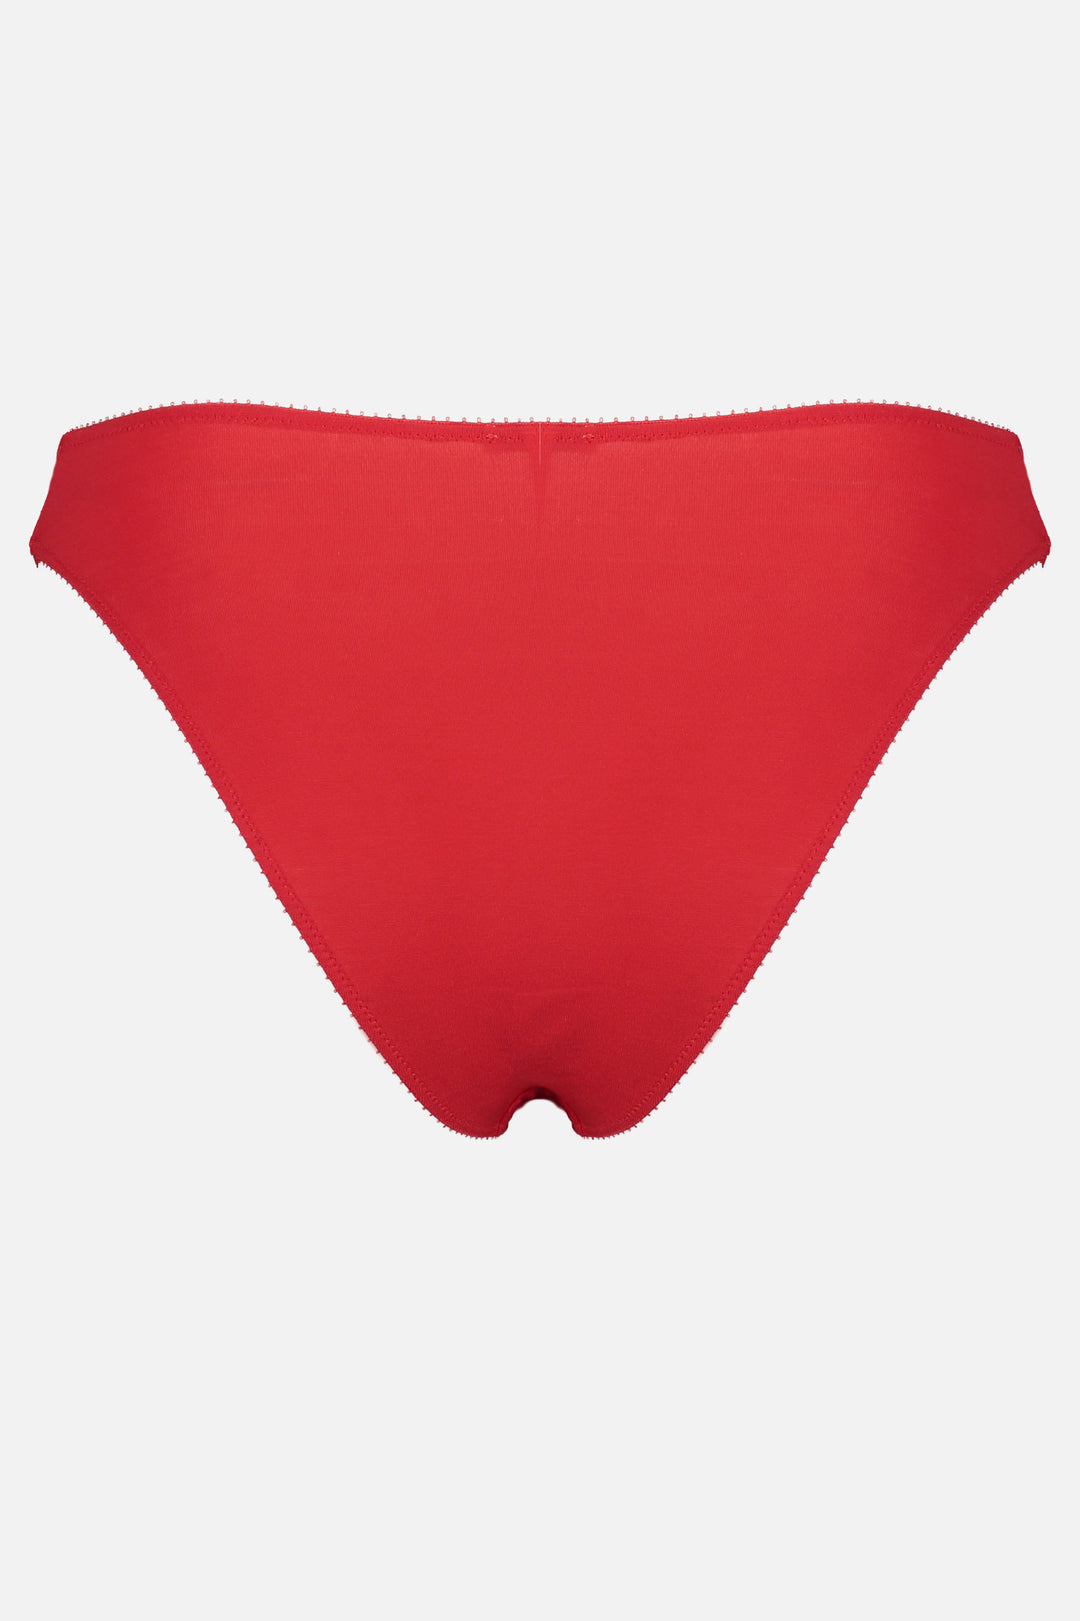 Videris Lingerie bikini knicker in red TENCEL™  mid-rise style with cheeky bottom coverage and soft elastics